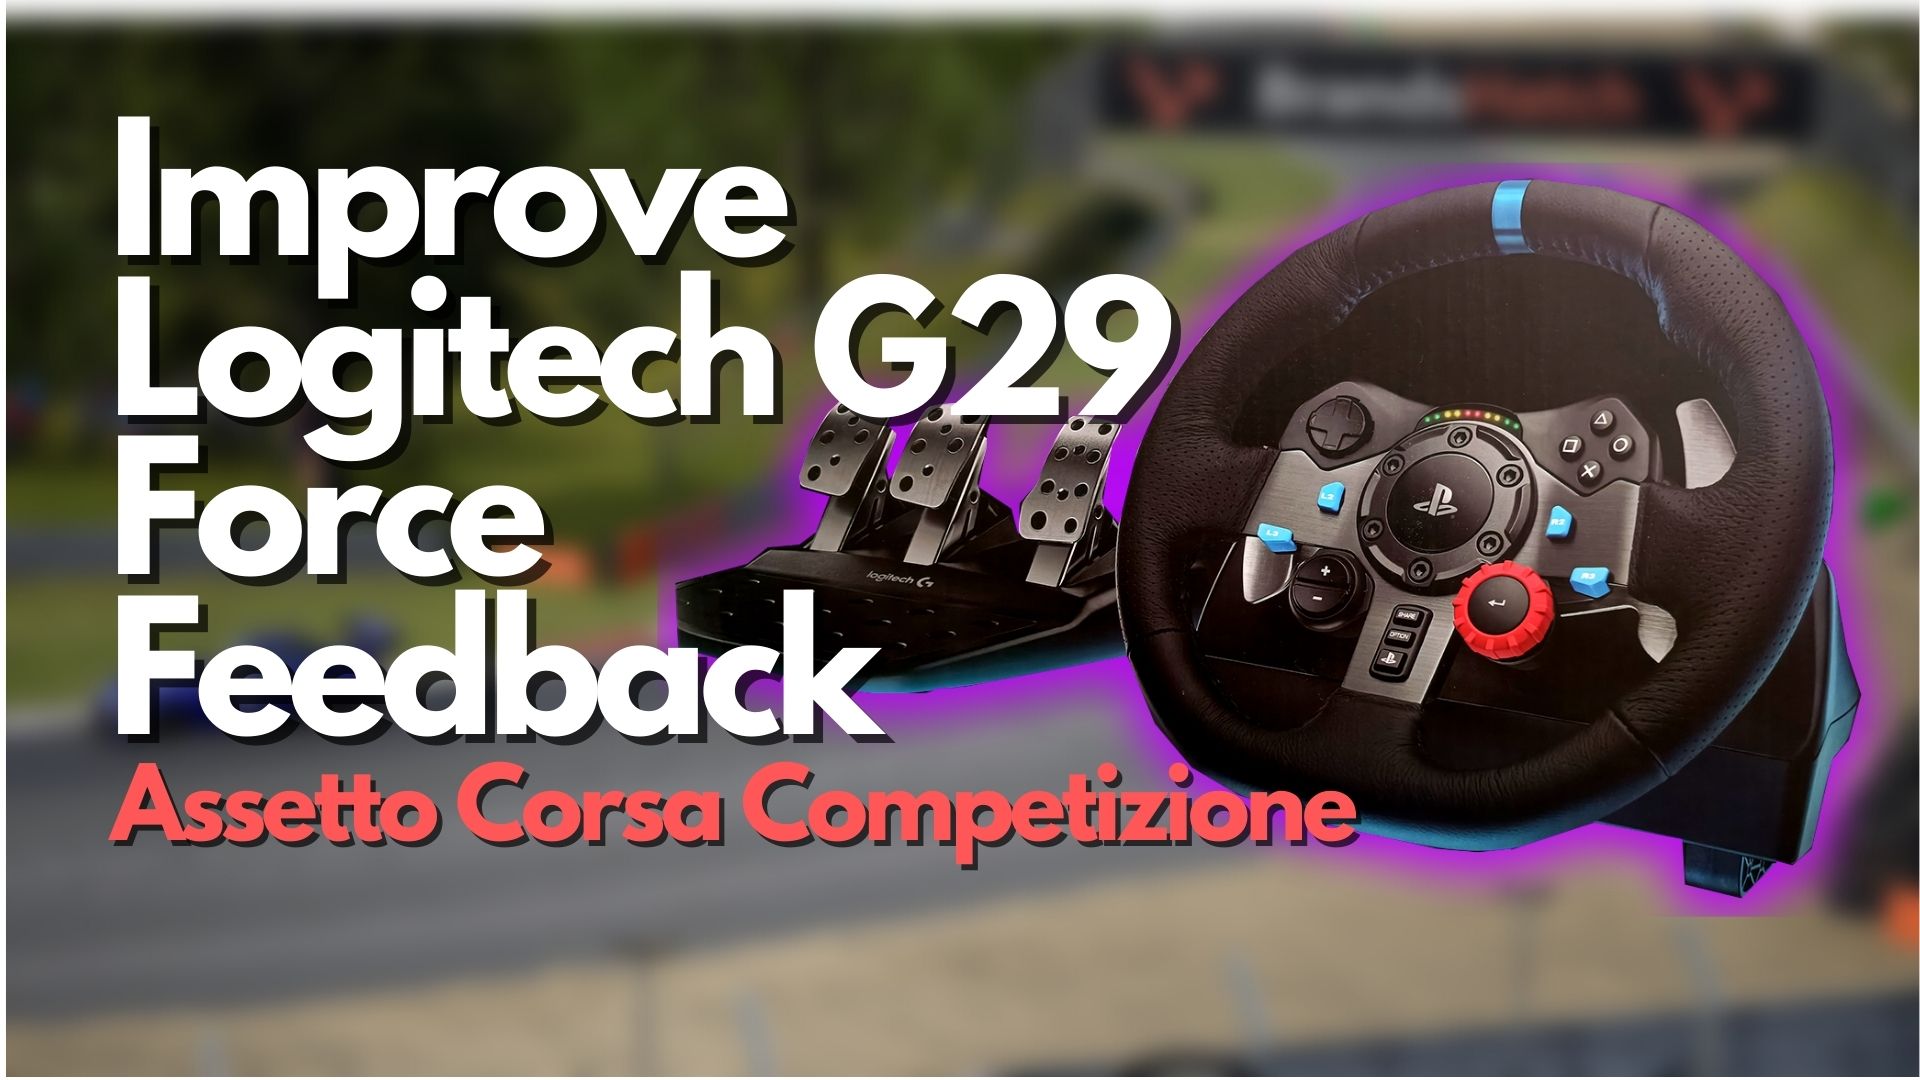 How to Improve Logitech G29 Force Feedback on Assetto Corsa Competizione